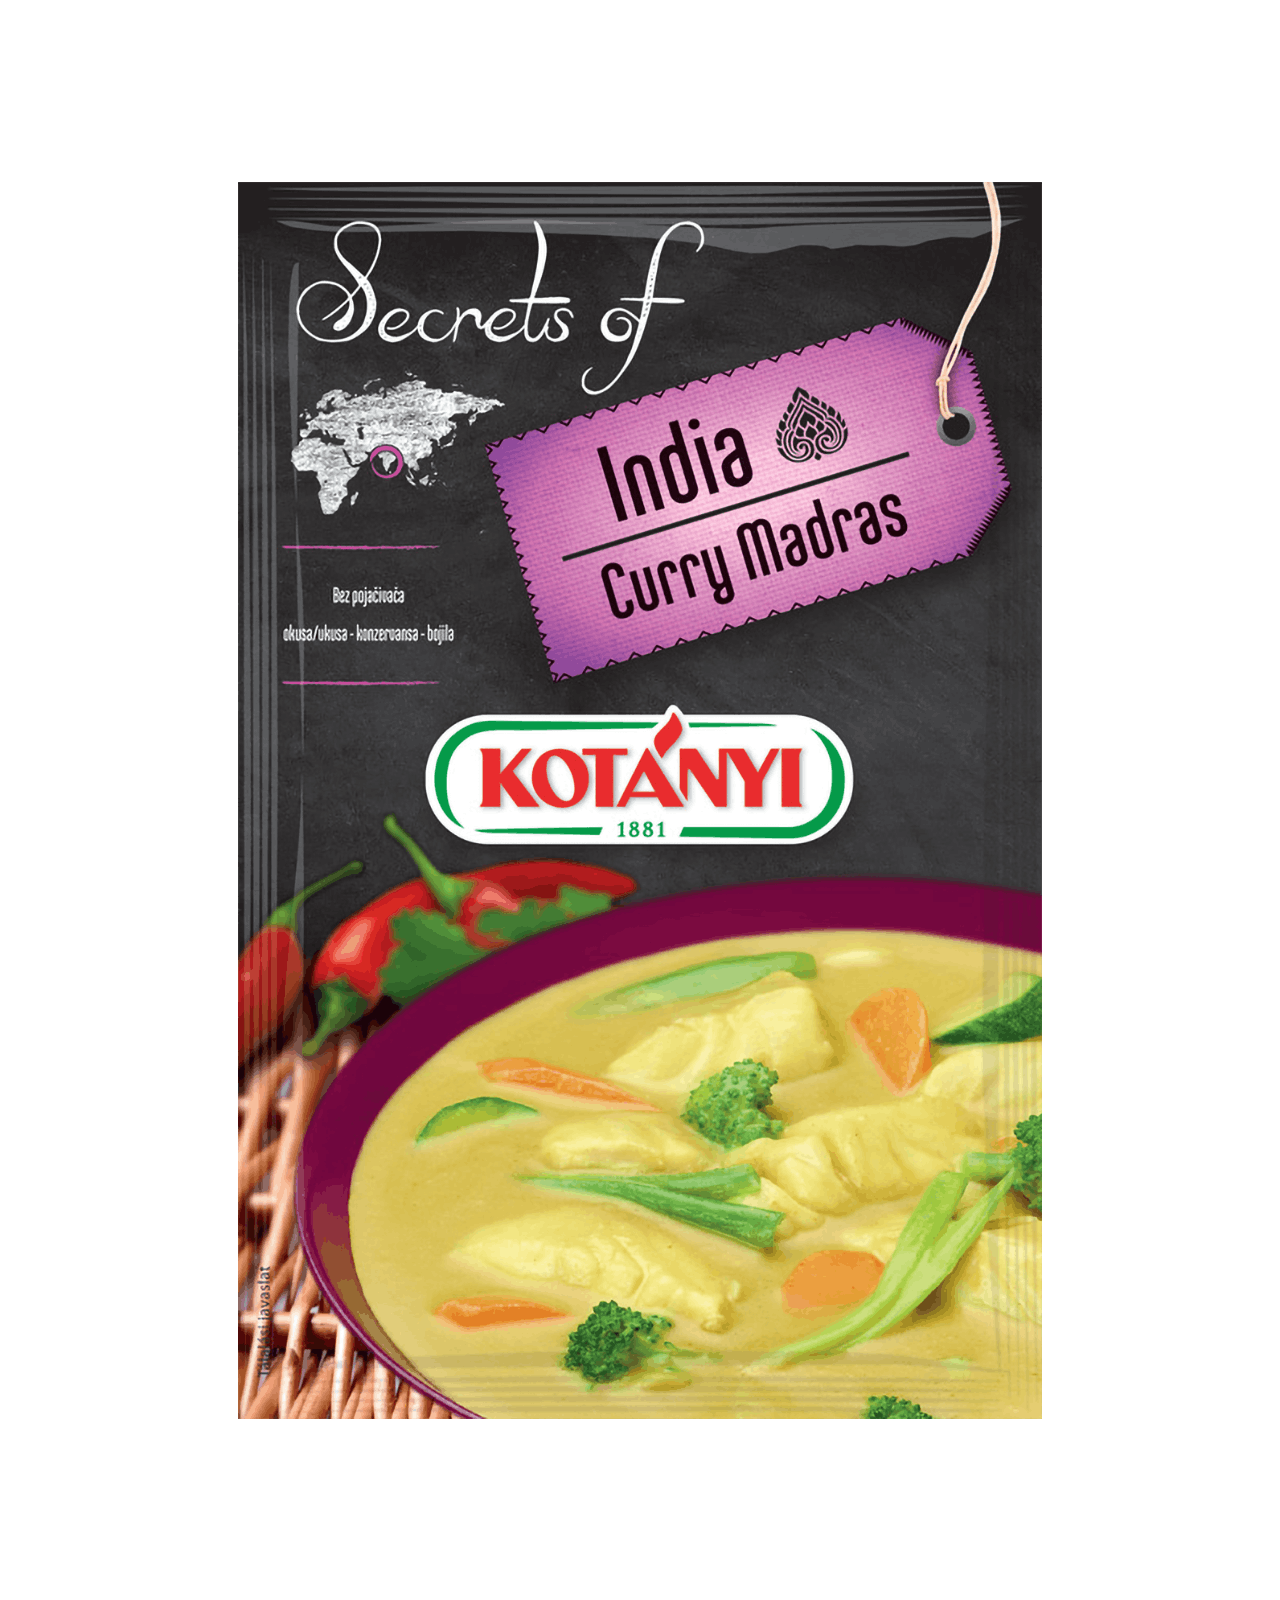 355008 Kotanyi Secrets Of India Curry Madras B2c Pouch